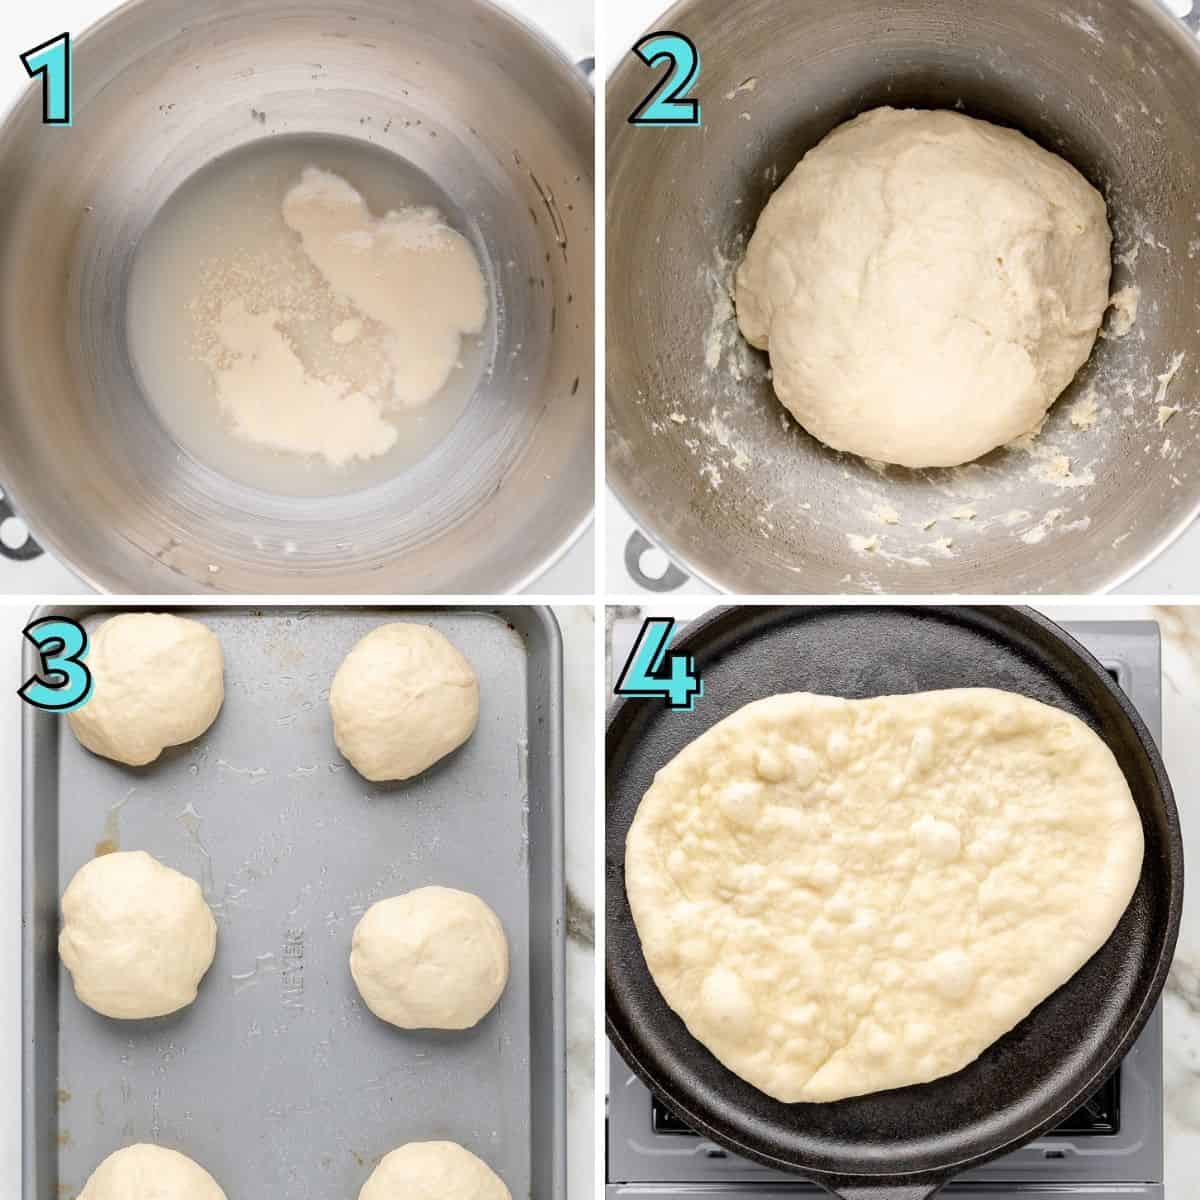 Step by step instructions to prepare tawa naan